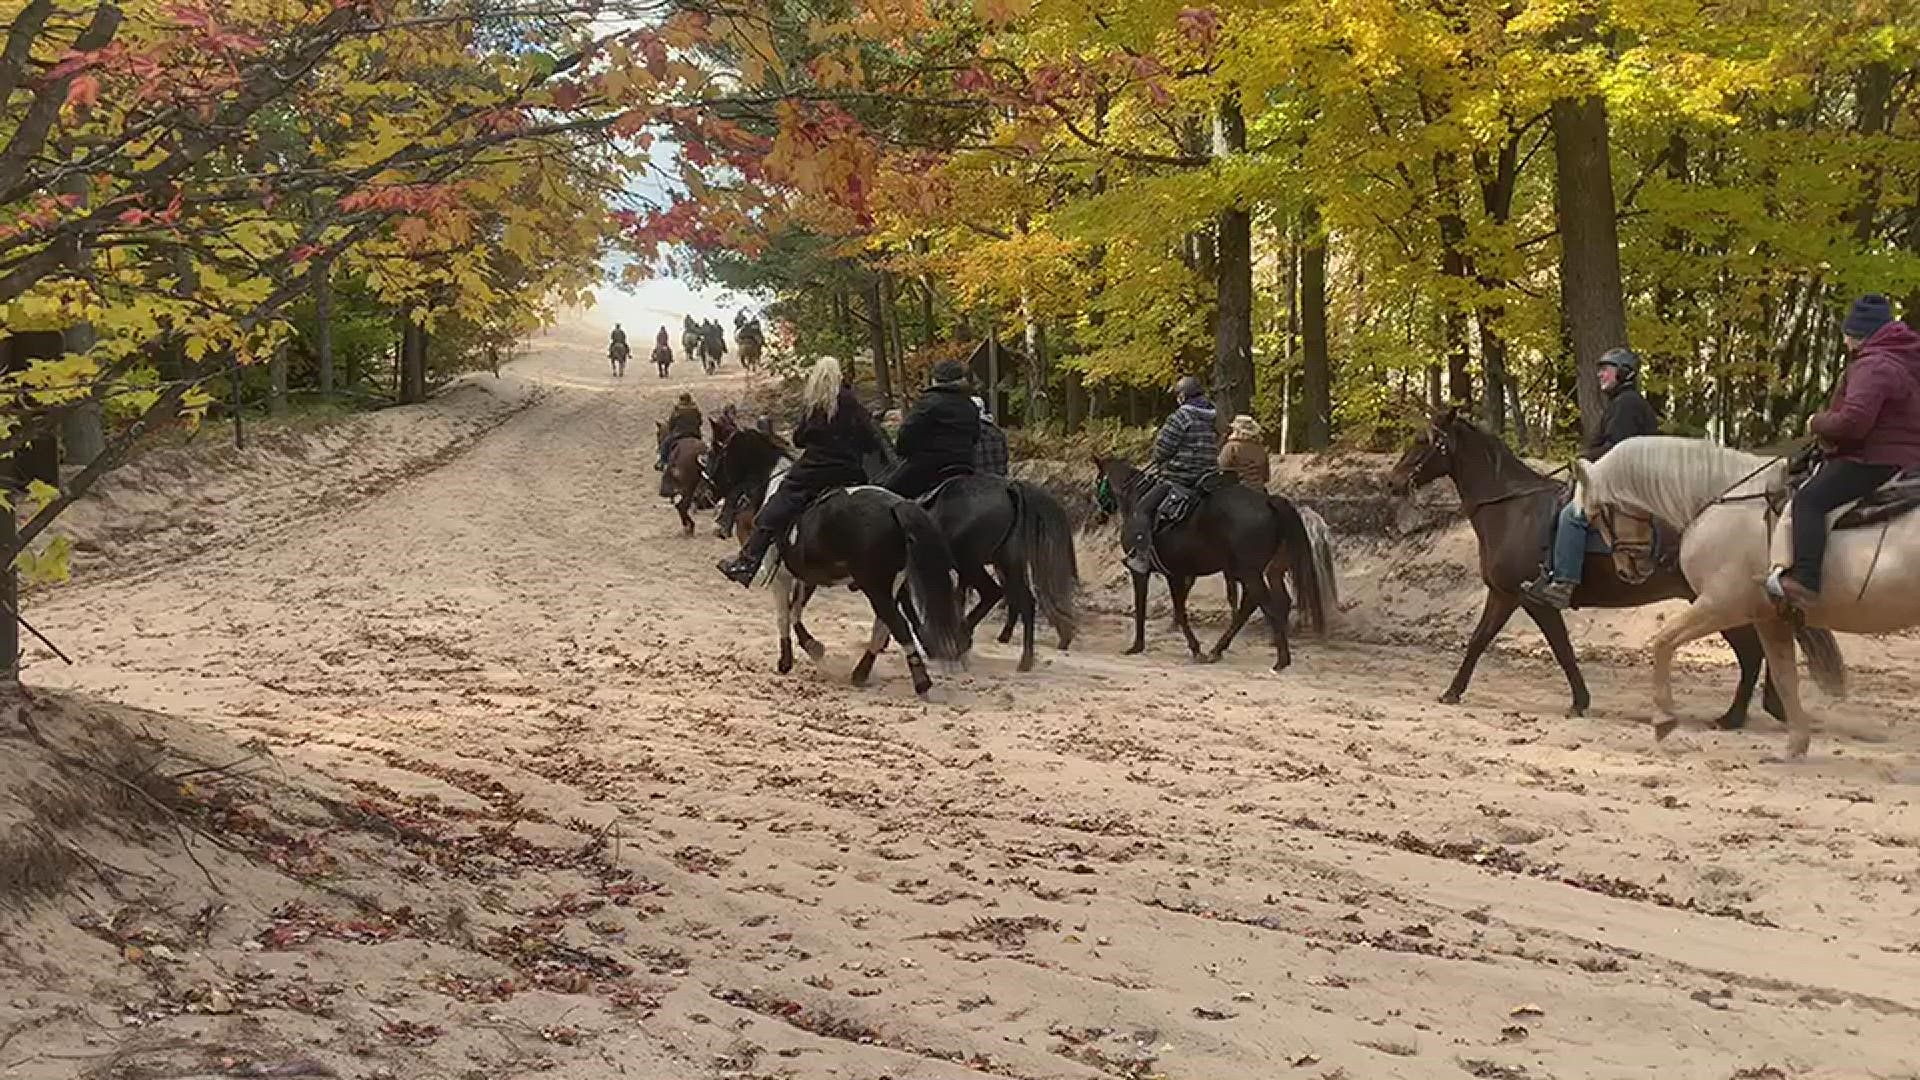 Michigan DNR gives a unique opportunity to ride horses along the lakeshore.